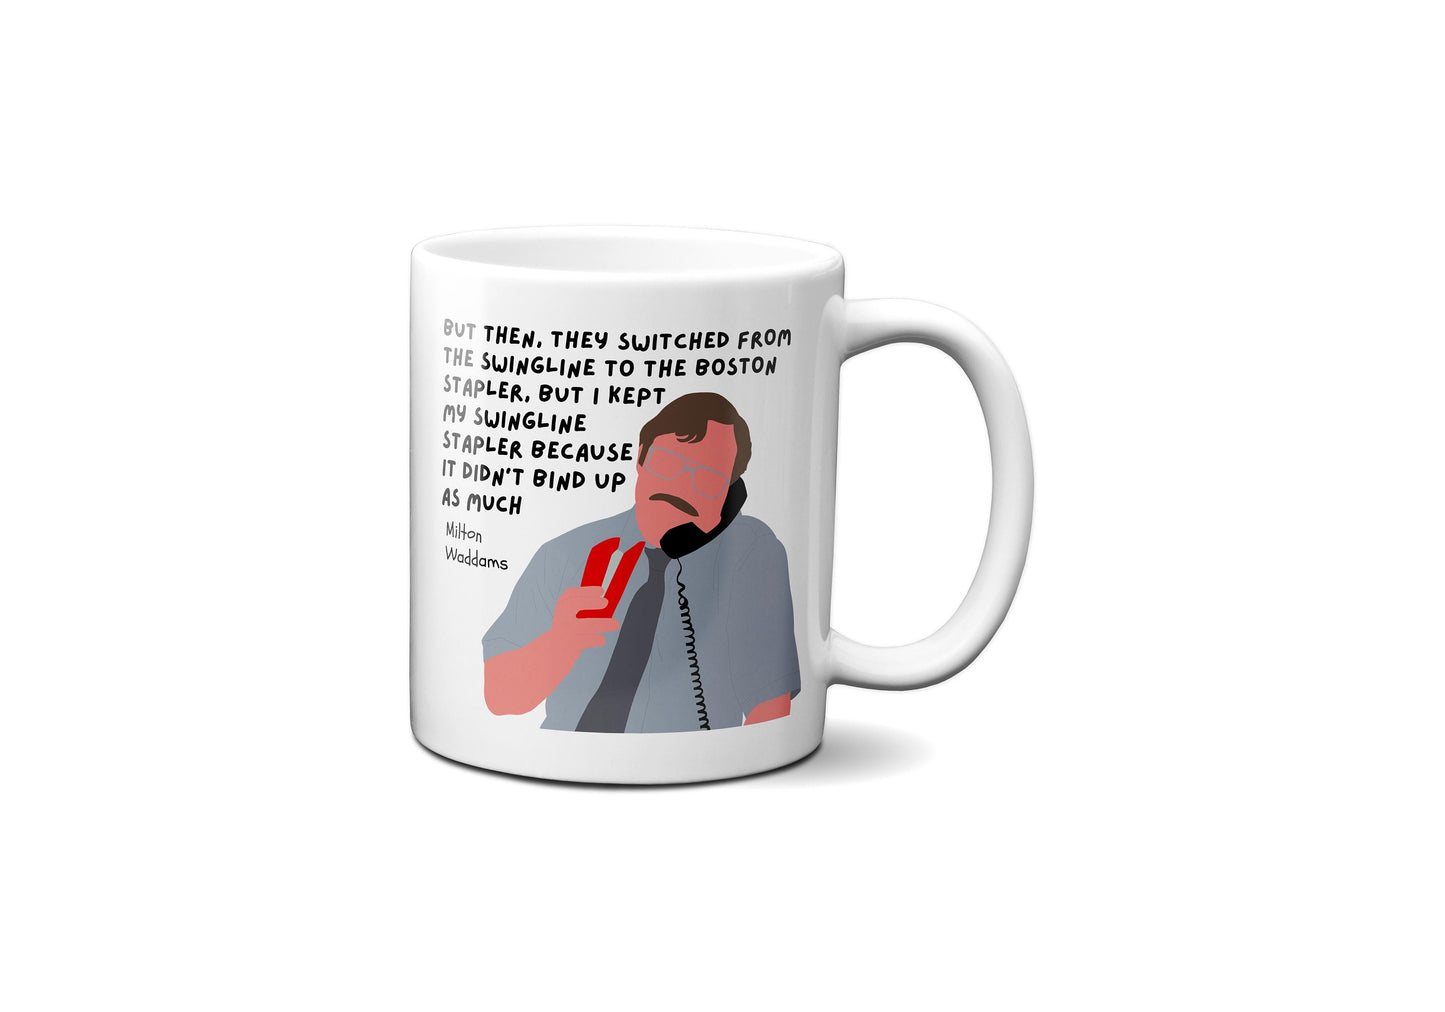 But then they switched from the Swingline Stapler | Milton Waddams Office Space Mug